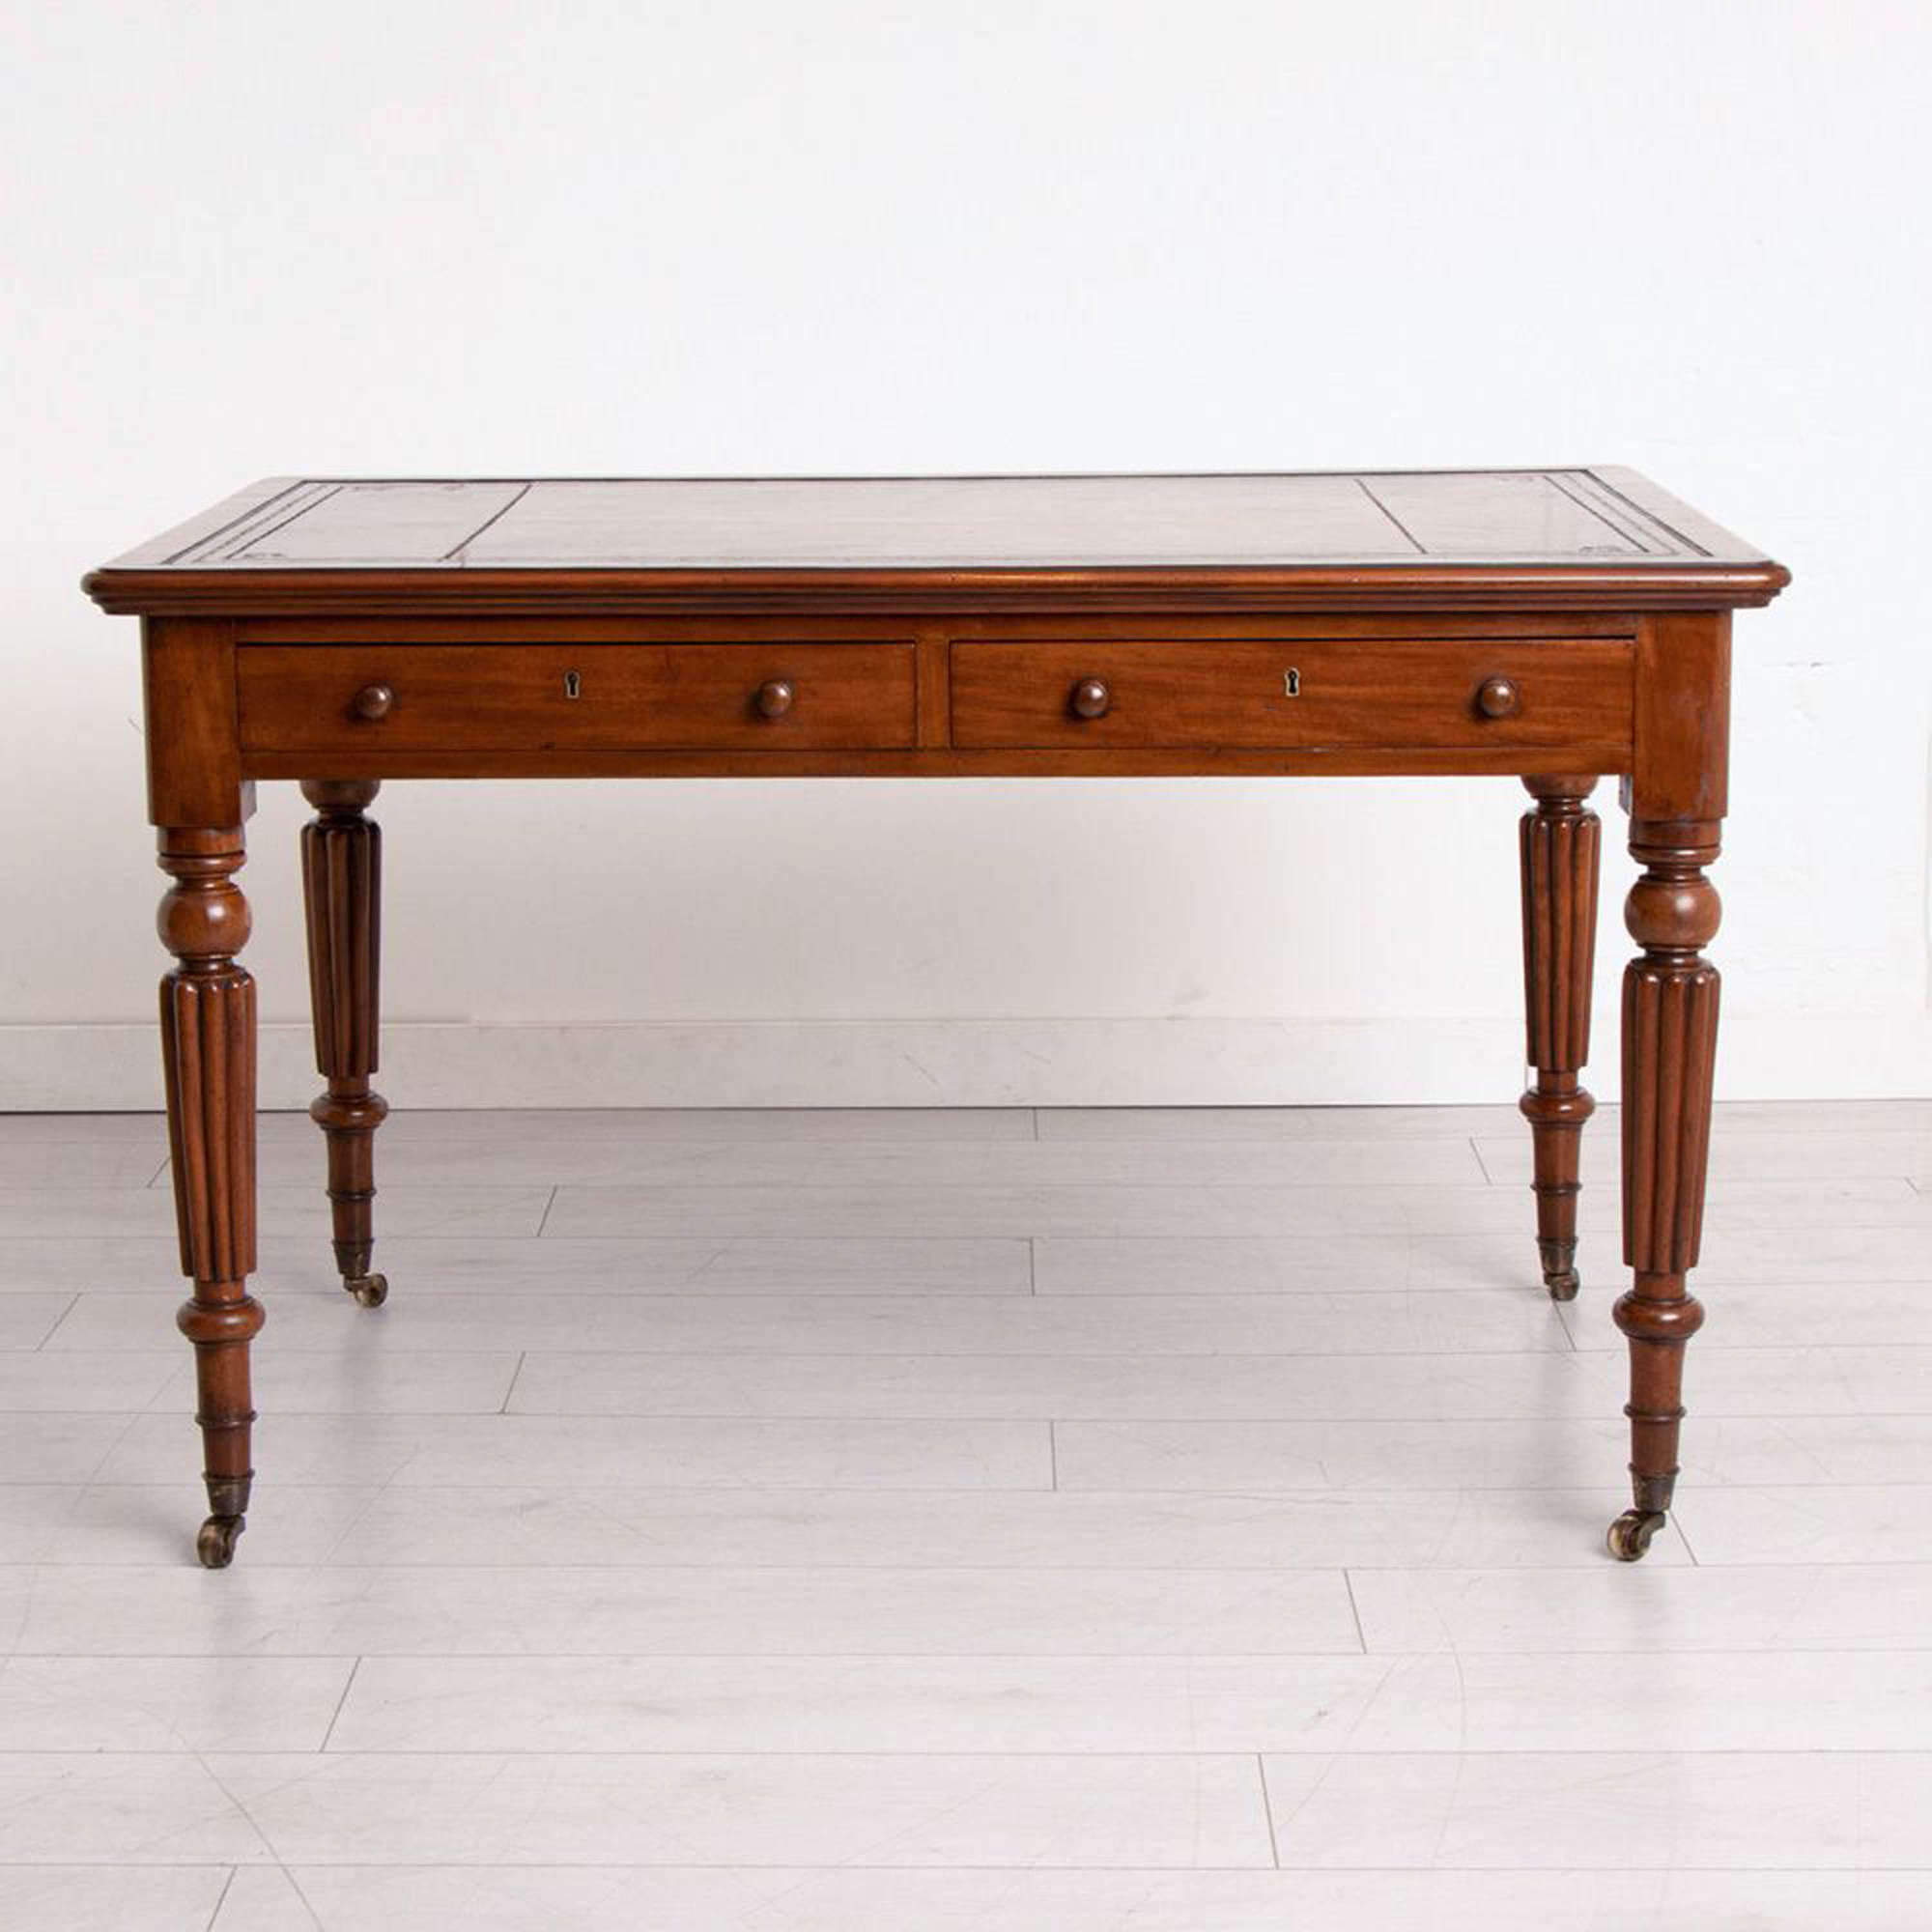 Victorian Mahogany Writing Table with fitted Leather Top c.1865